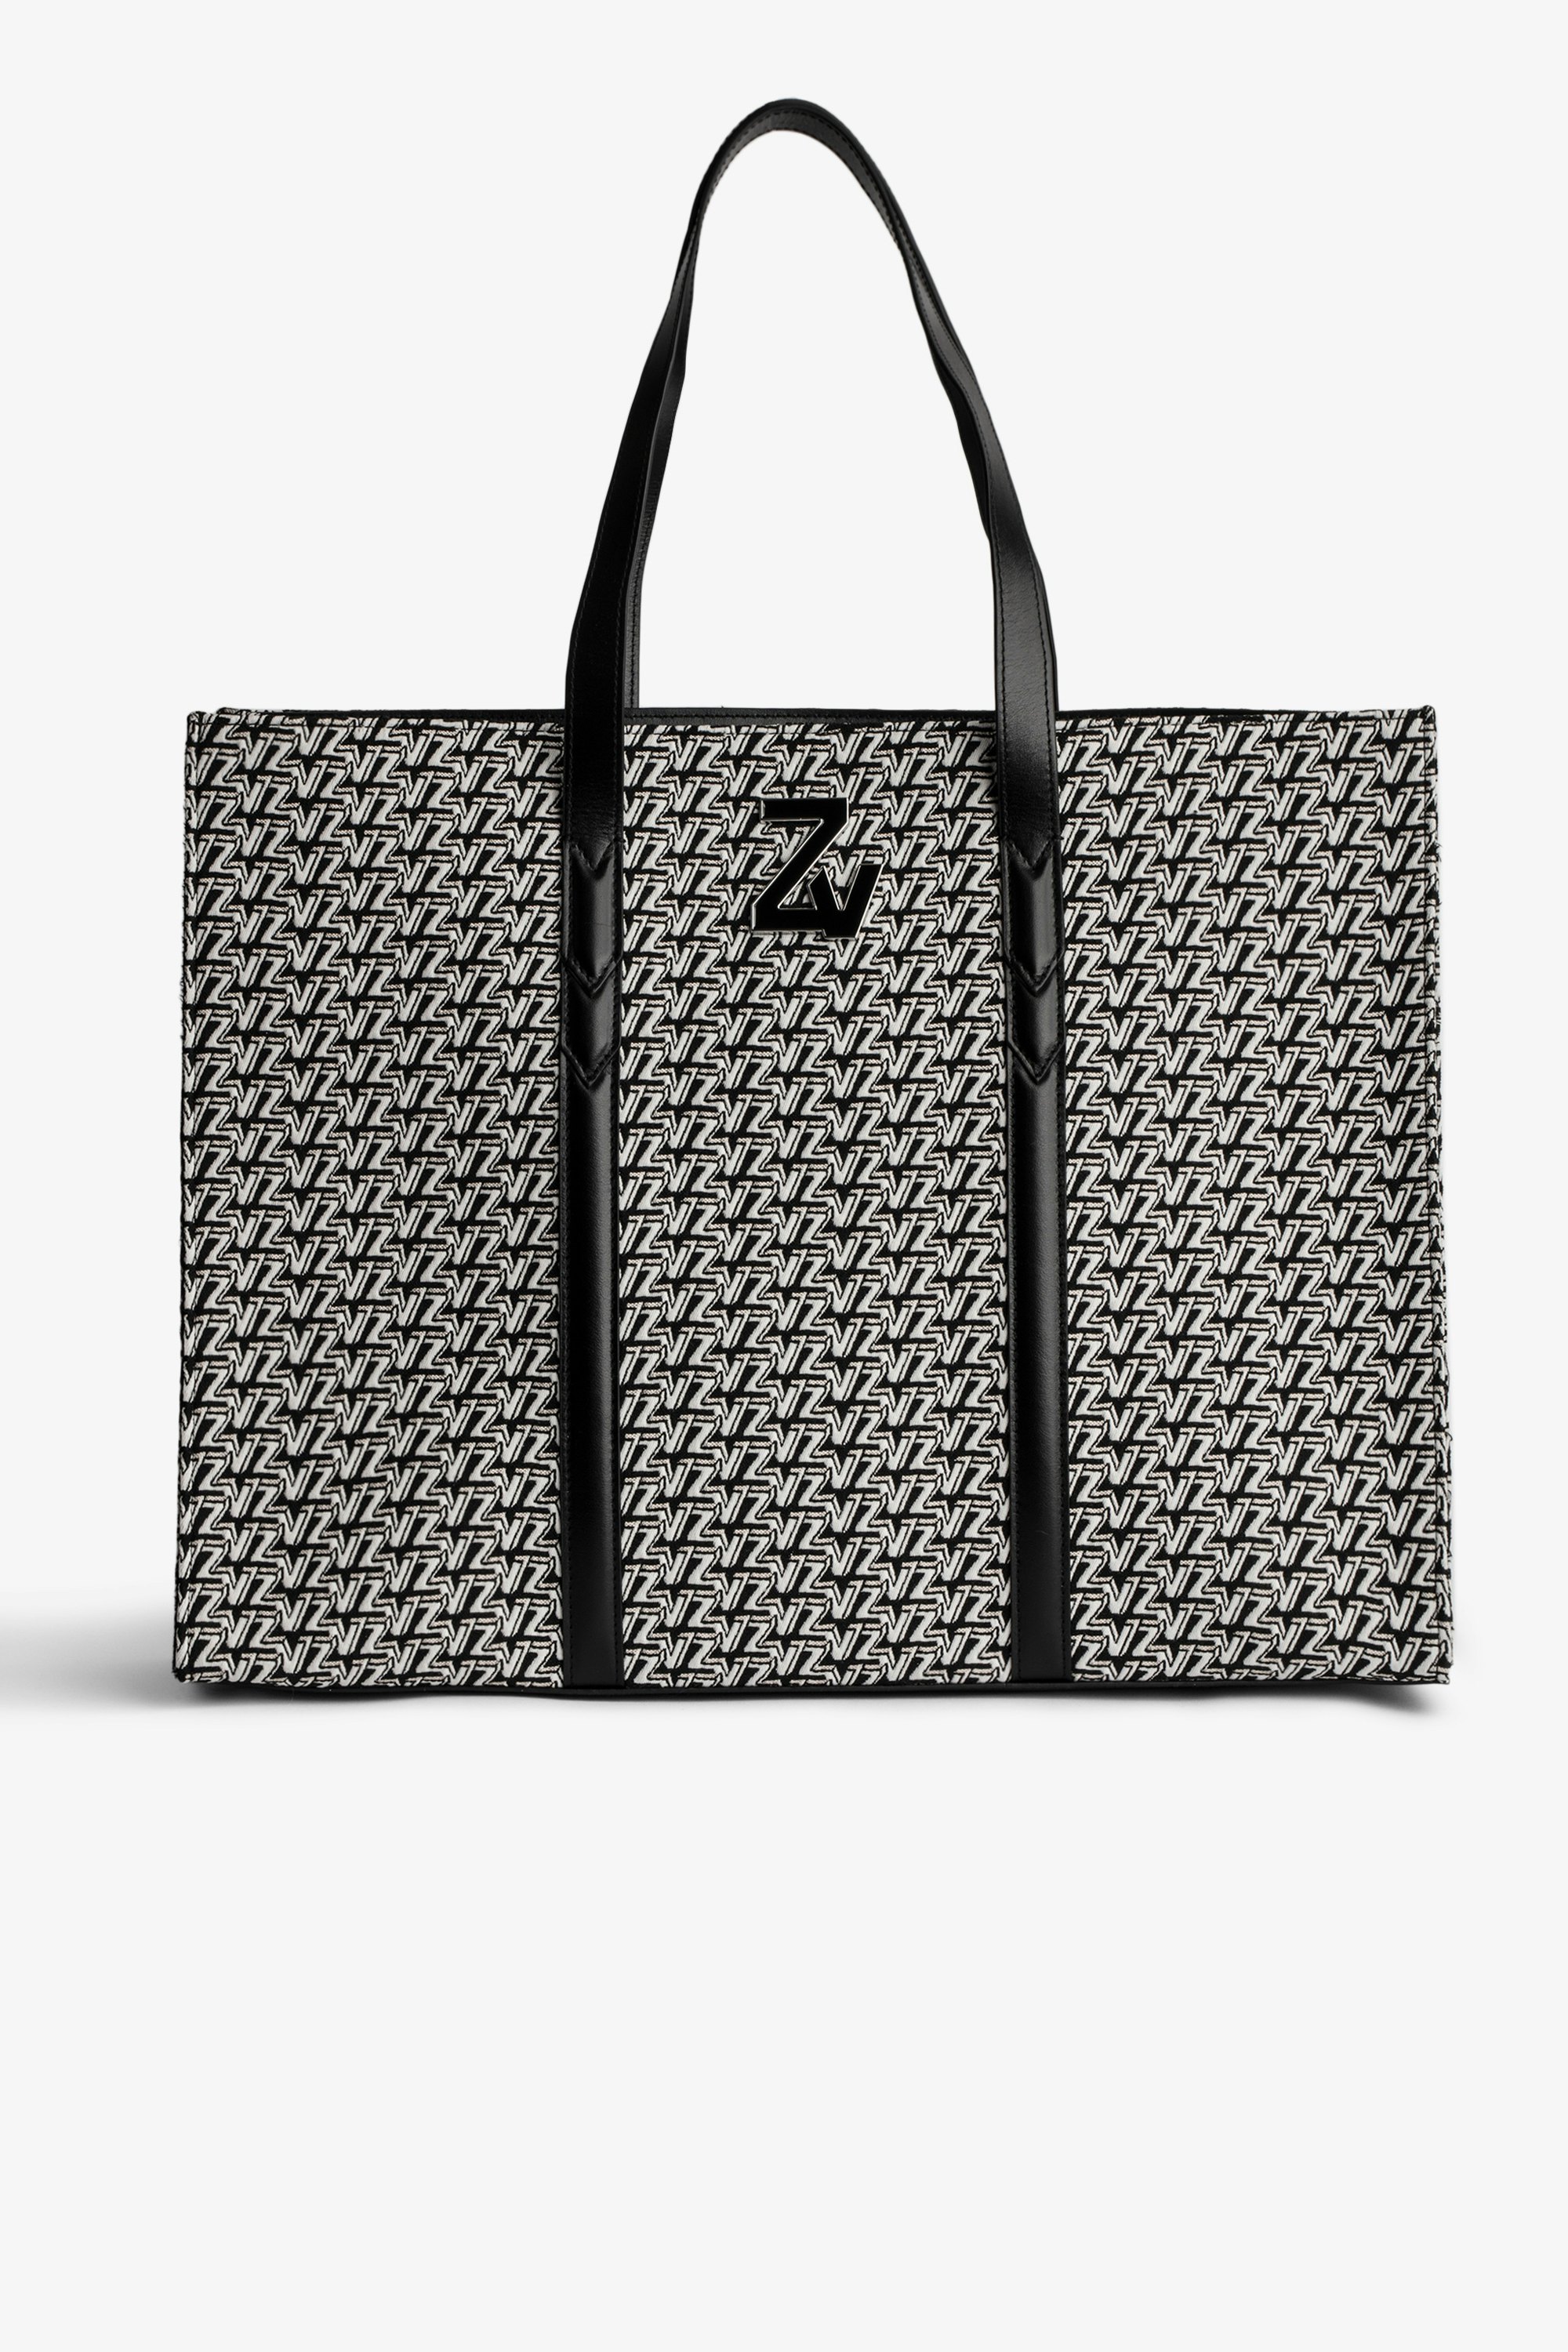 ZV Initiale Le Tote Monogram Bag Women’s tote bag in black leather and jacquard